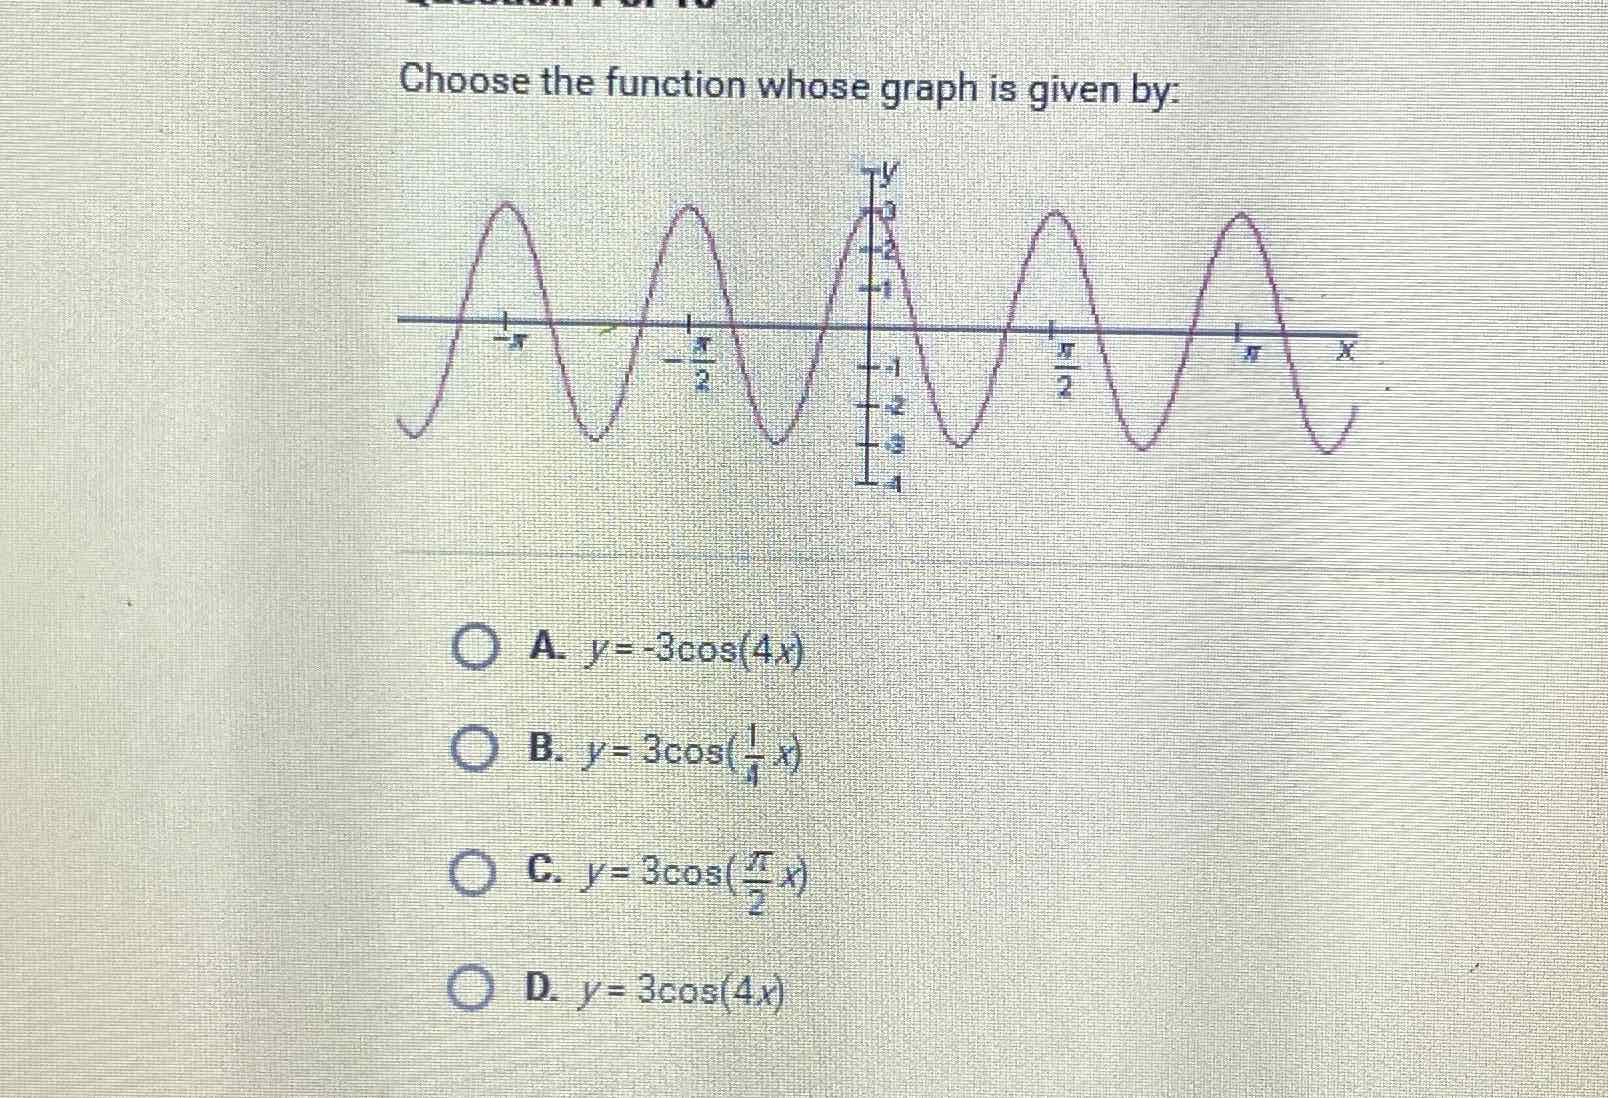 Choose the function whose graph is given by:
A. \( y=-3 \cos (4 x) \)
B. \( y=3 \cos \left(\frac{1}{1} x\right) \)
C. \( y=3 \cos \left(\frac{\pi}{2} x\right) \)
D. \( y=3 \cos (4 x) \)